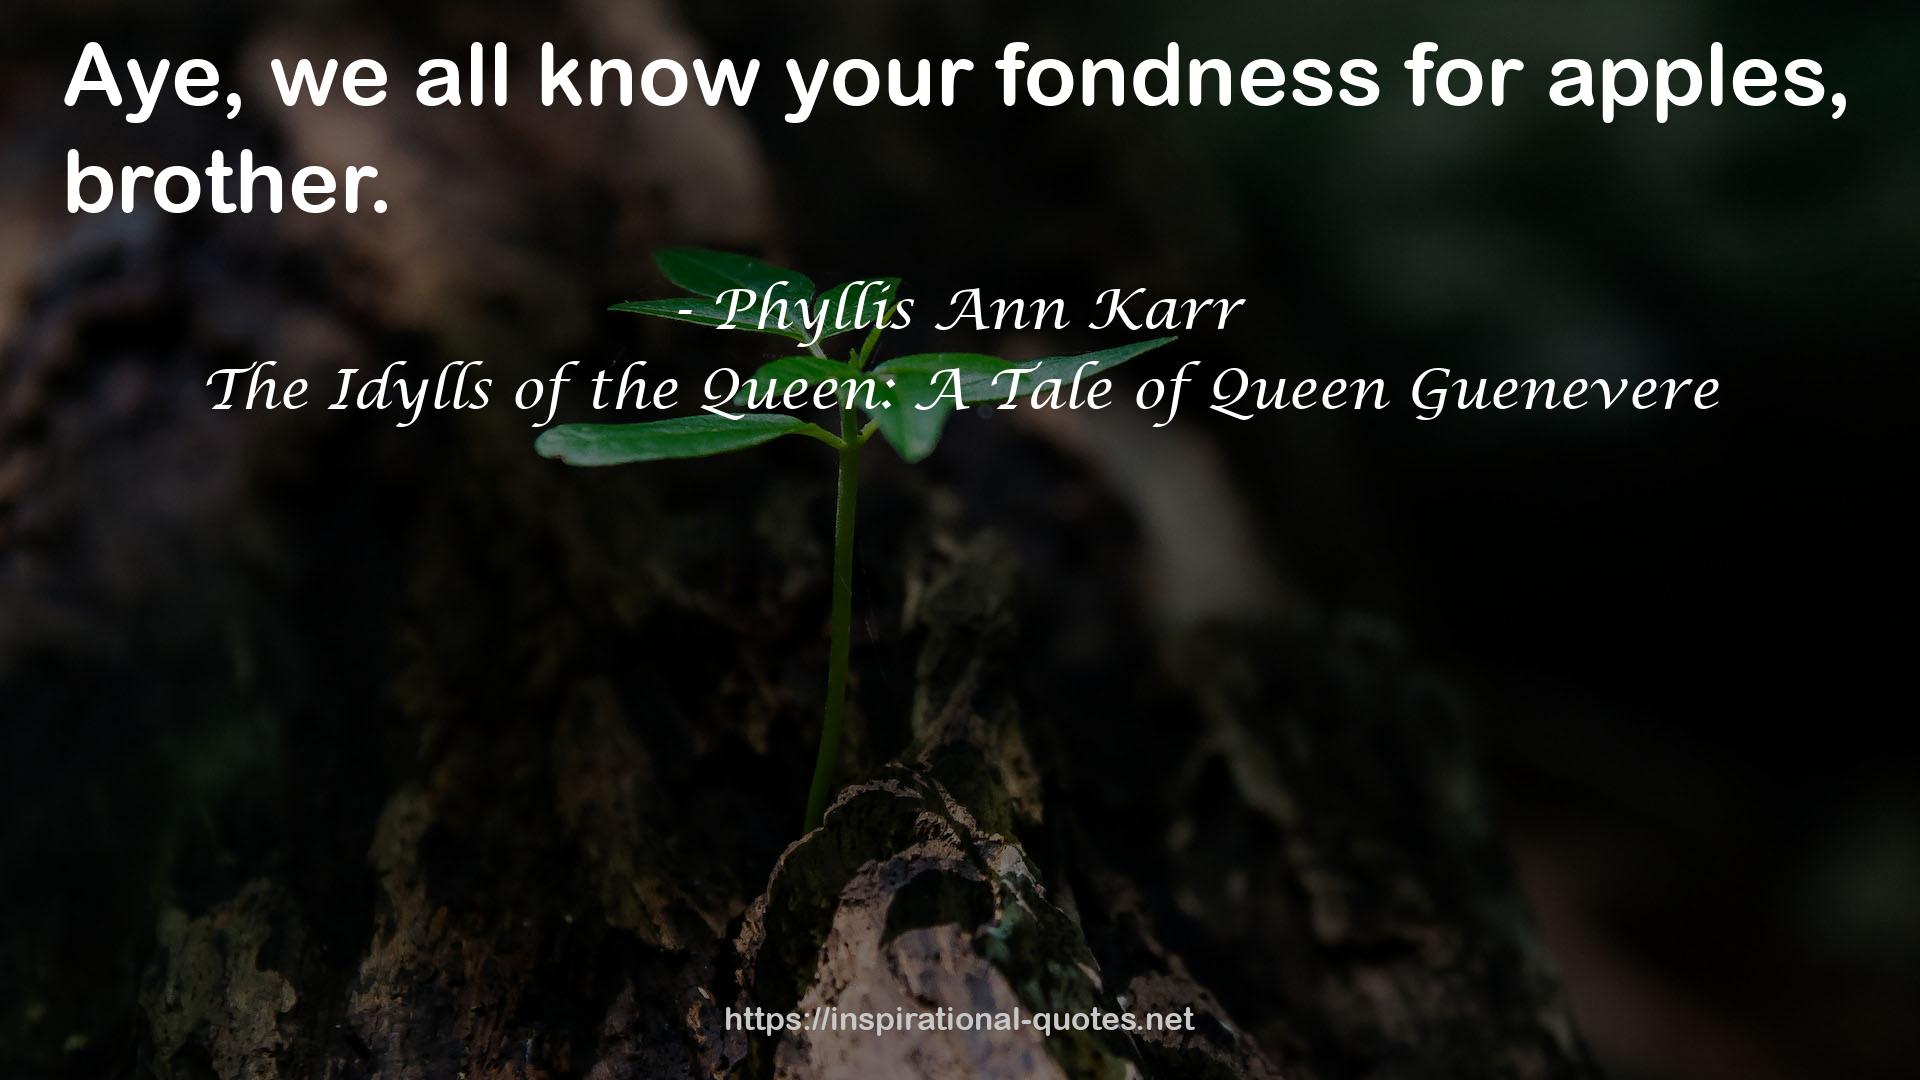 The Idylls of the Queen: A Tale of Queen Guenevere QUOTES